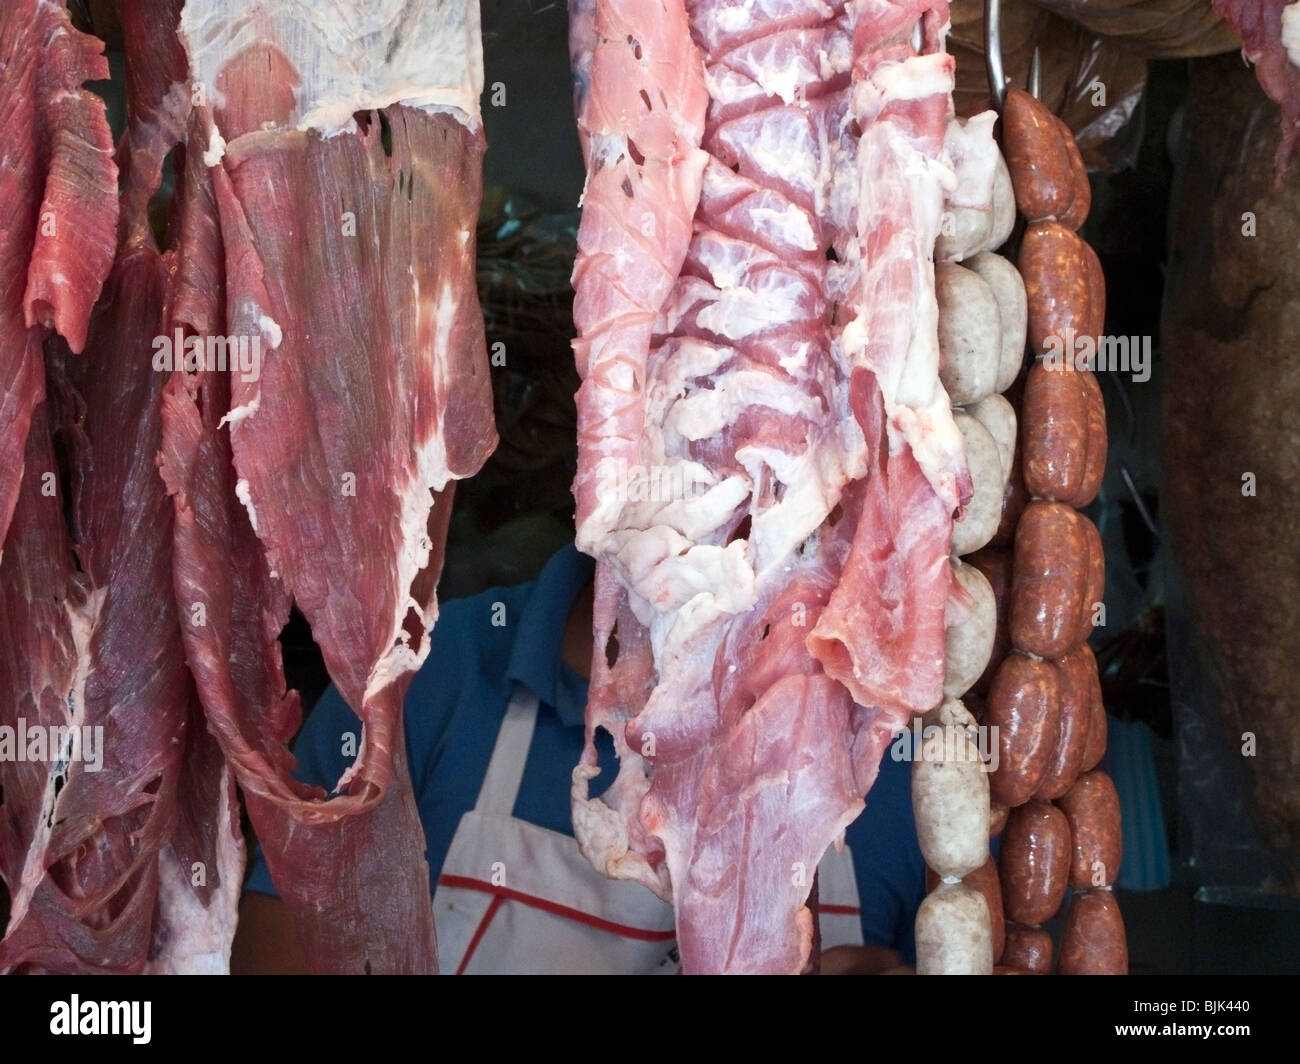 Fresh Red Meat Hanging on Metal Hooks Stock Photo - Image of carcass, food:  67935718